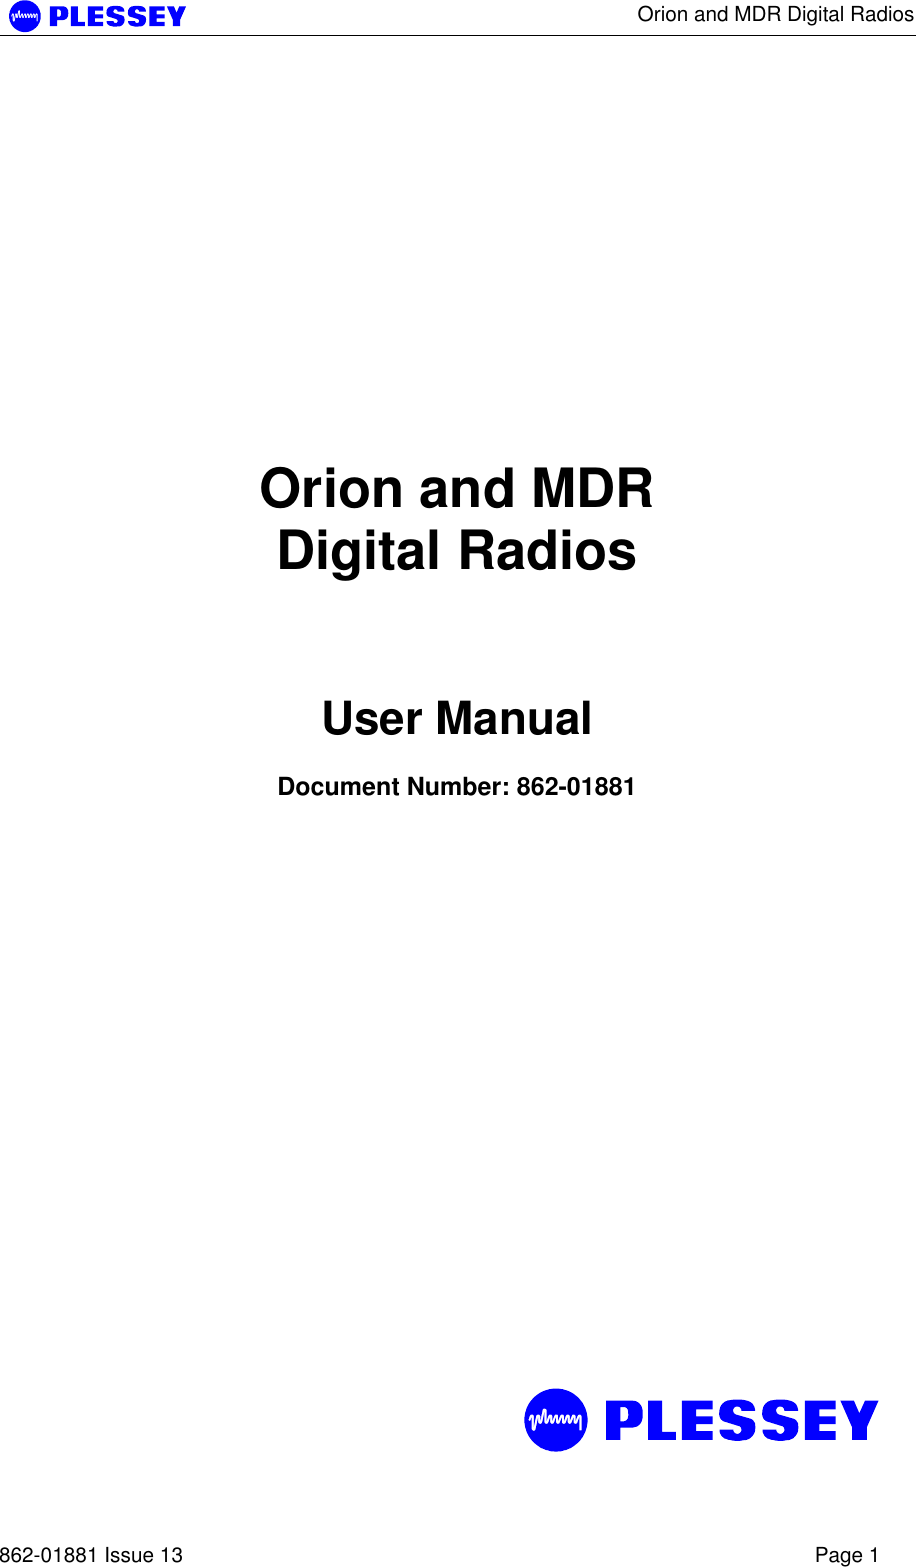      Orion and MDR Digital Radios   862-01881 Issue 13    Page 1       Orion and MDR Digital Radios    User Manual  Document Number: 862-01881  